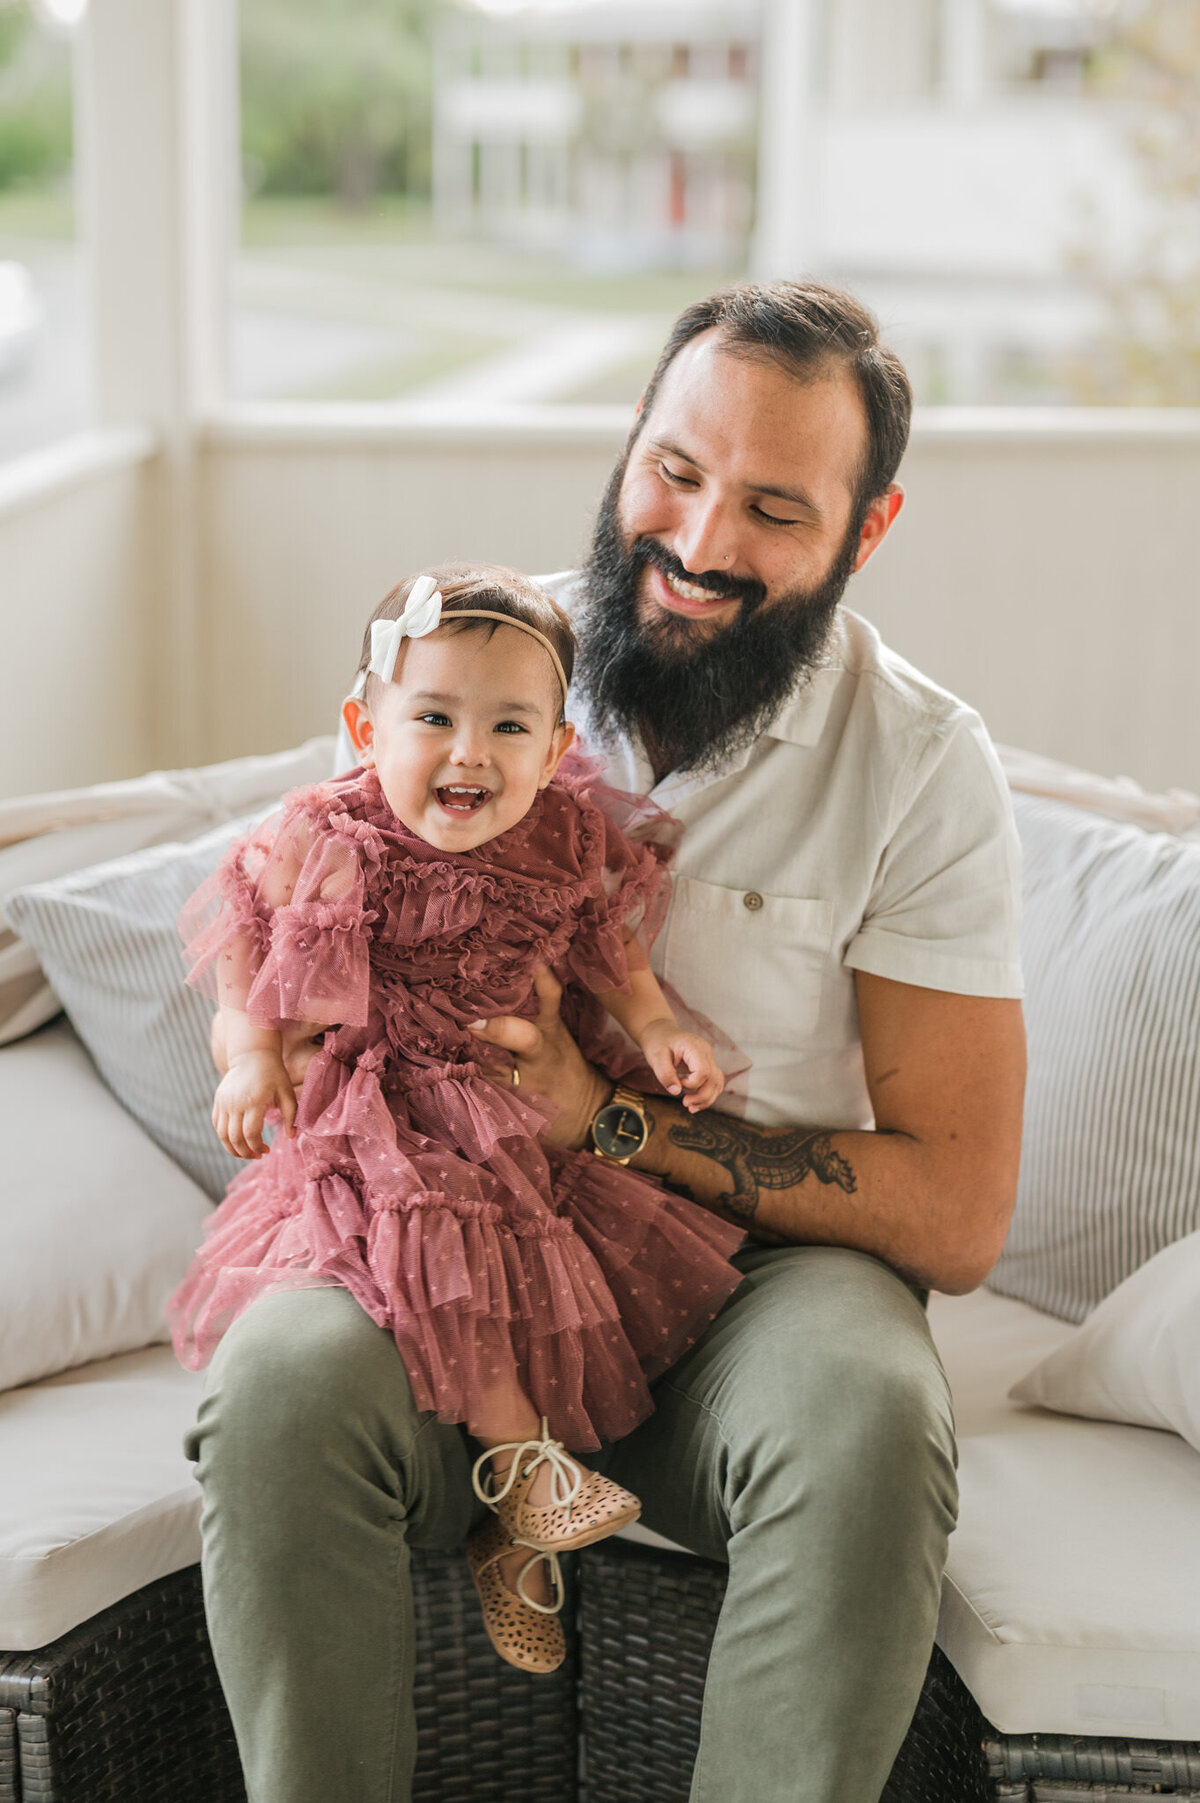 Toddler laughs on Dad's lap during family photography with Cassey Golden.